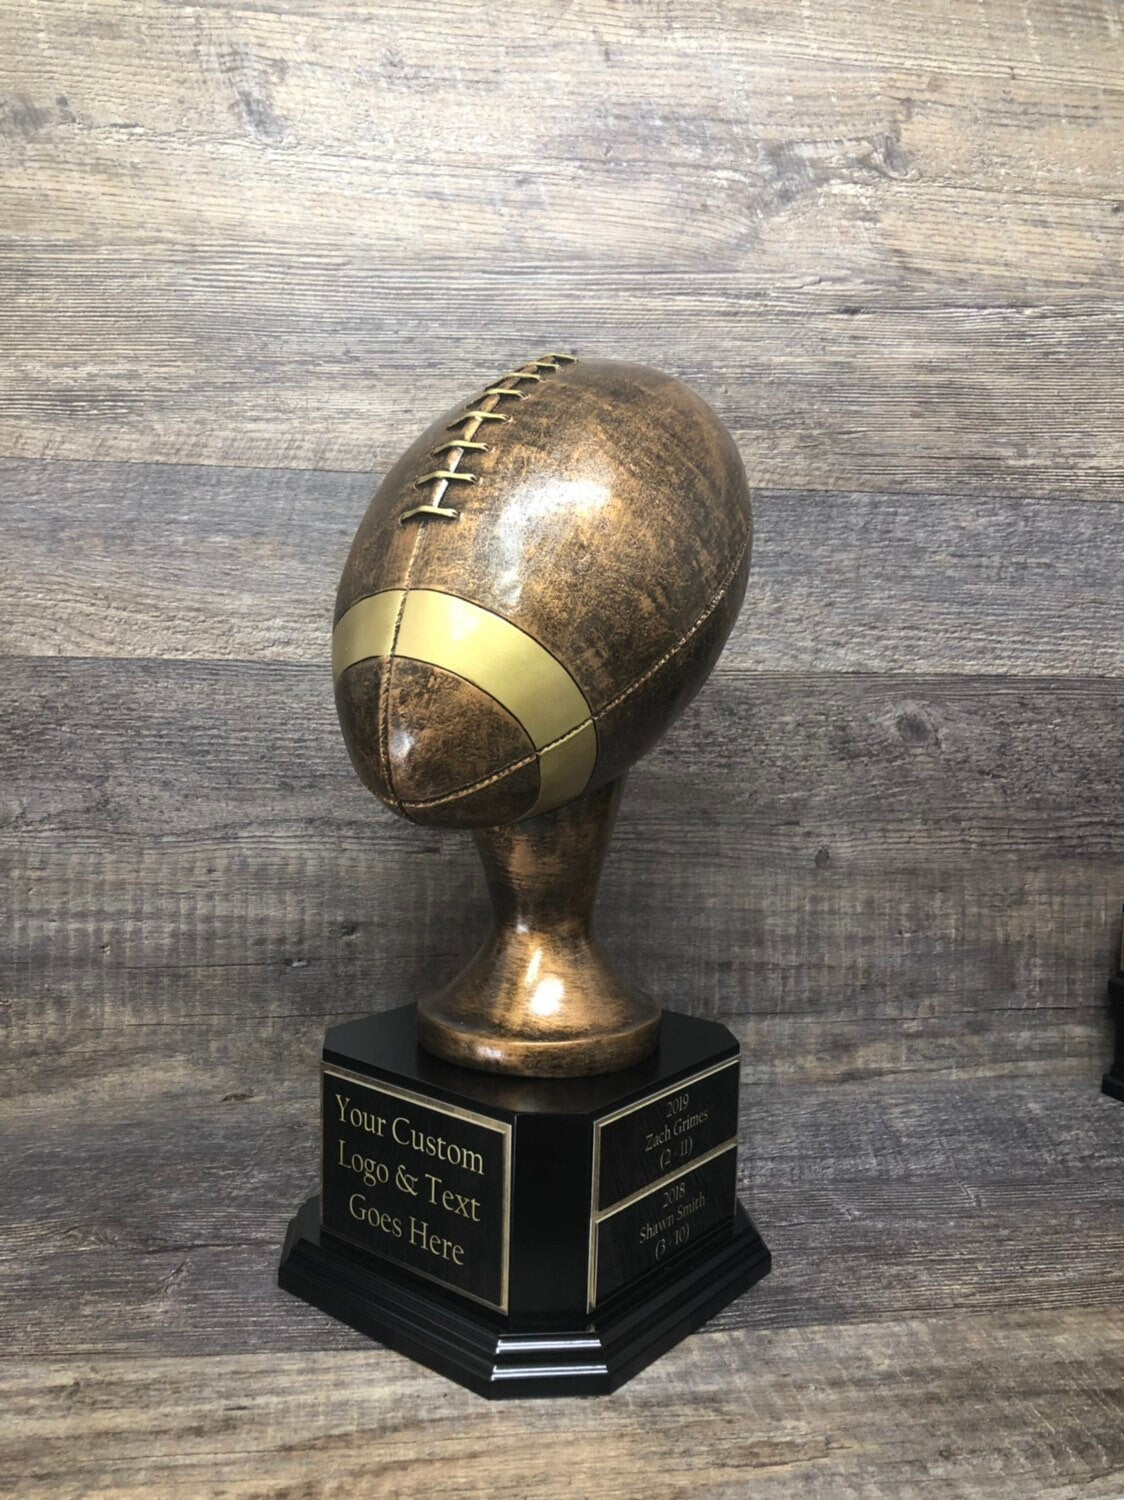 Perpetual Fantasy Football Trophy FULL SIZE 15" Antique Rustic Brown Football FFL Trophy 6 or 12 Year Championship League Award Winner